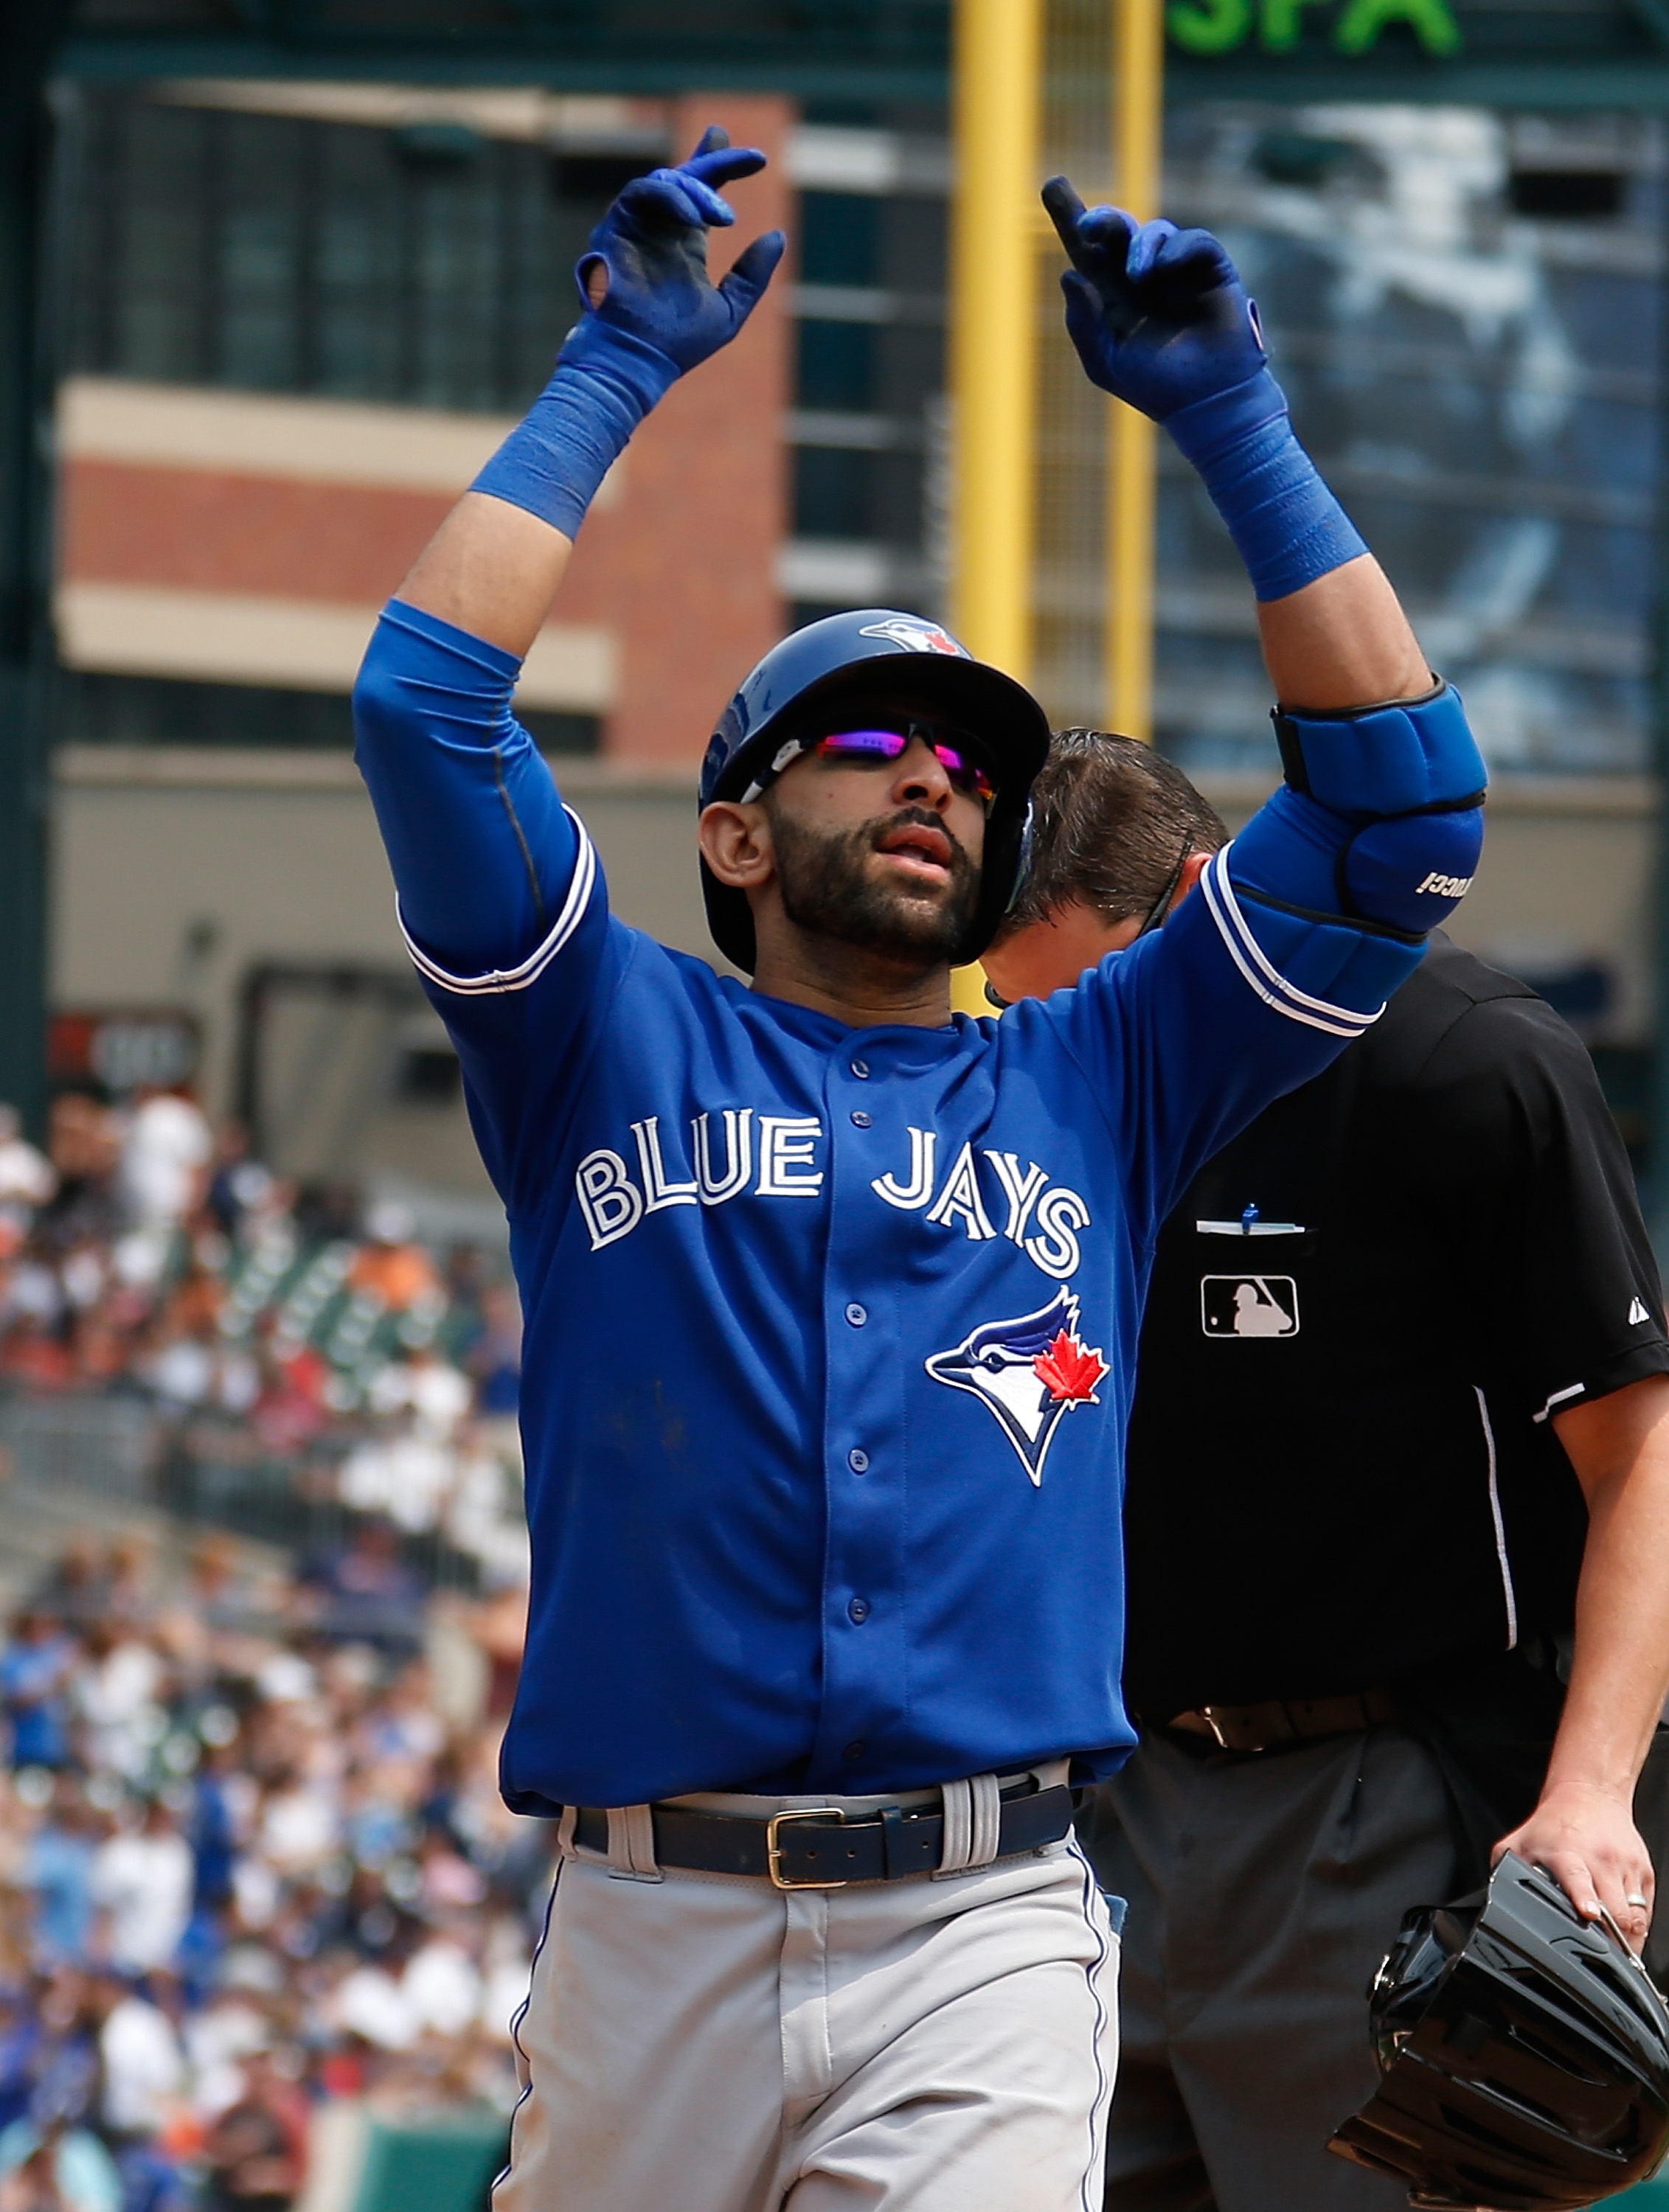 Jose Bautista is one of the Dominican players upset by Colin Cowherd's comments. (Getty Images)